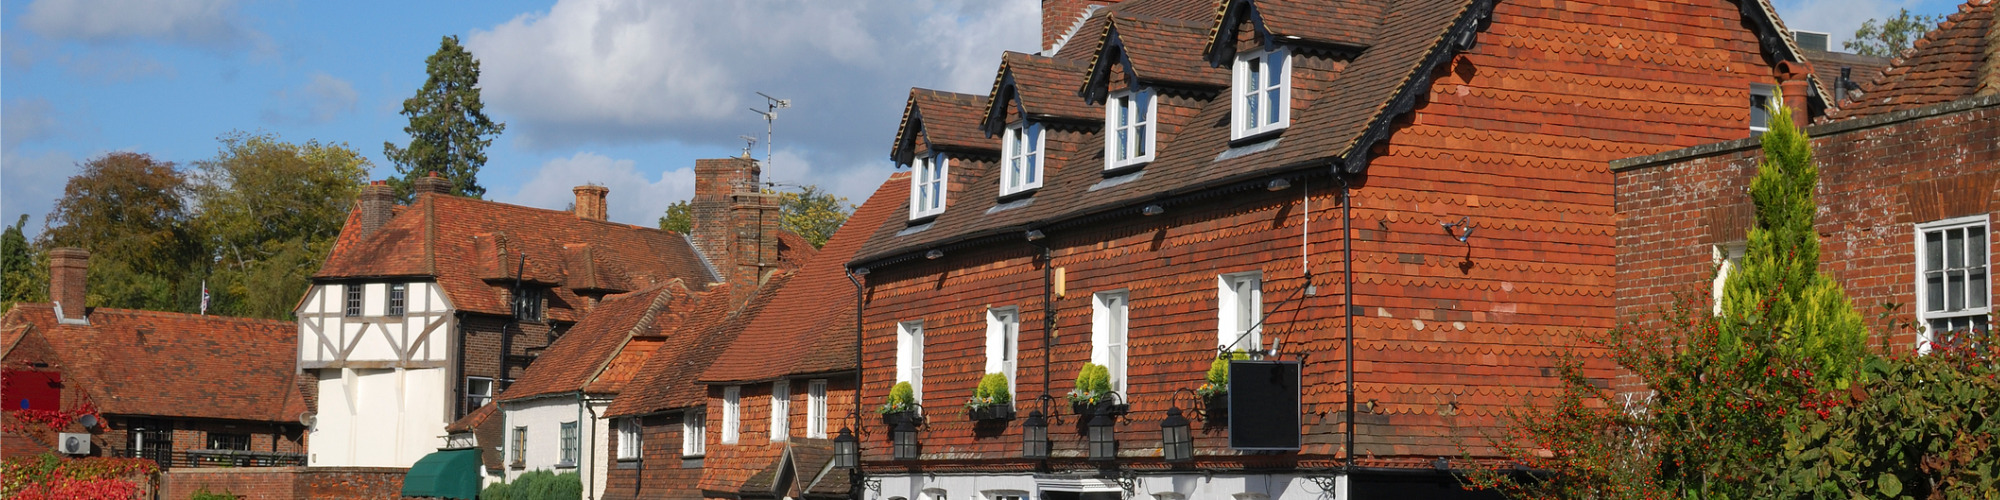 Tax & UK Residential Property - An Advisor’s Guide 